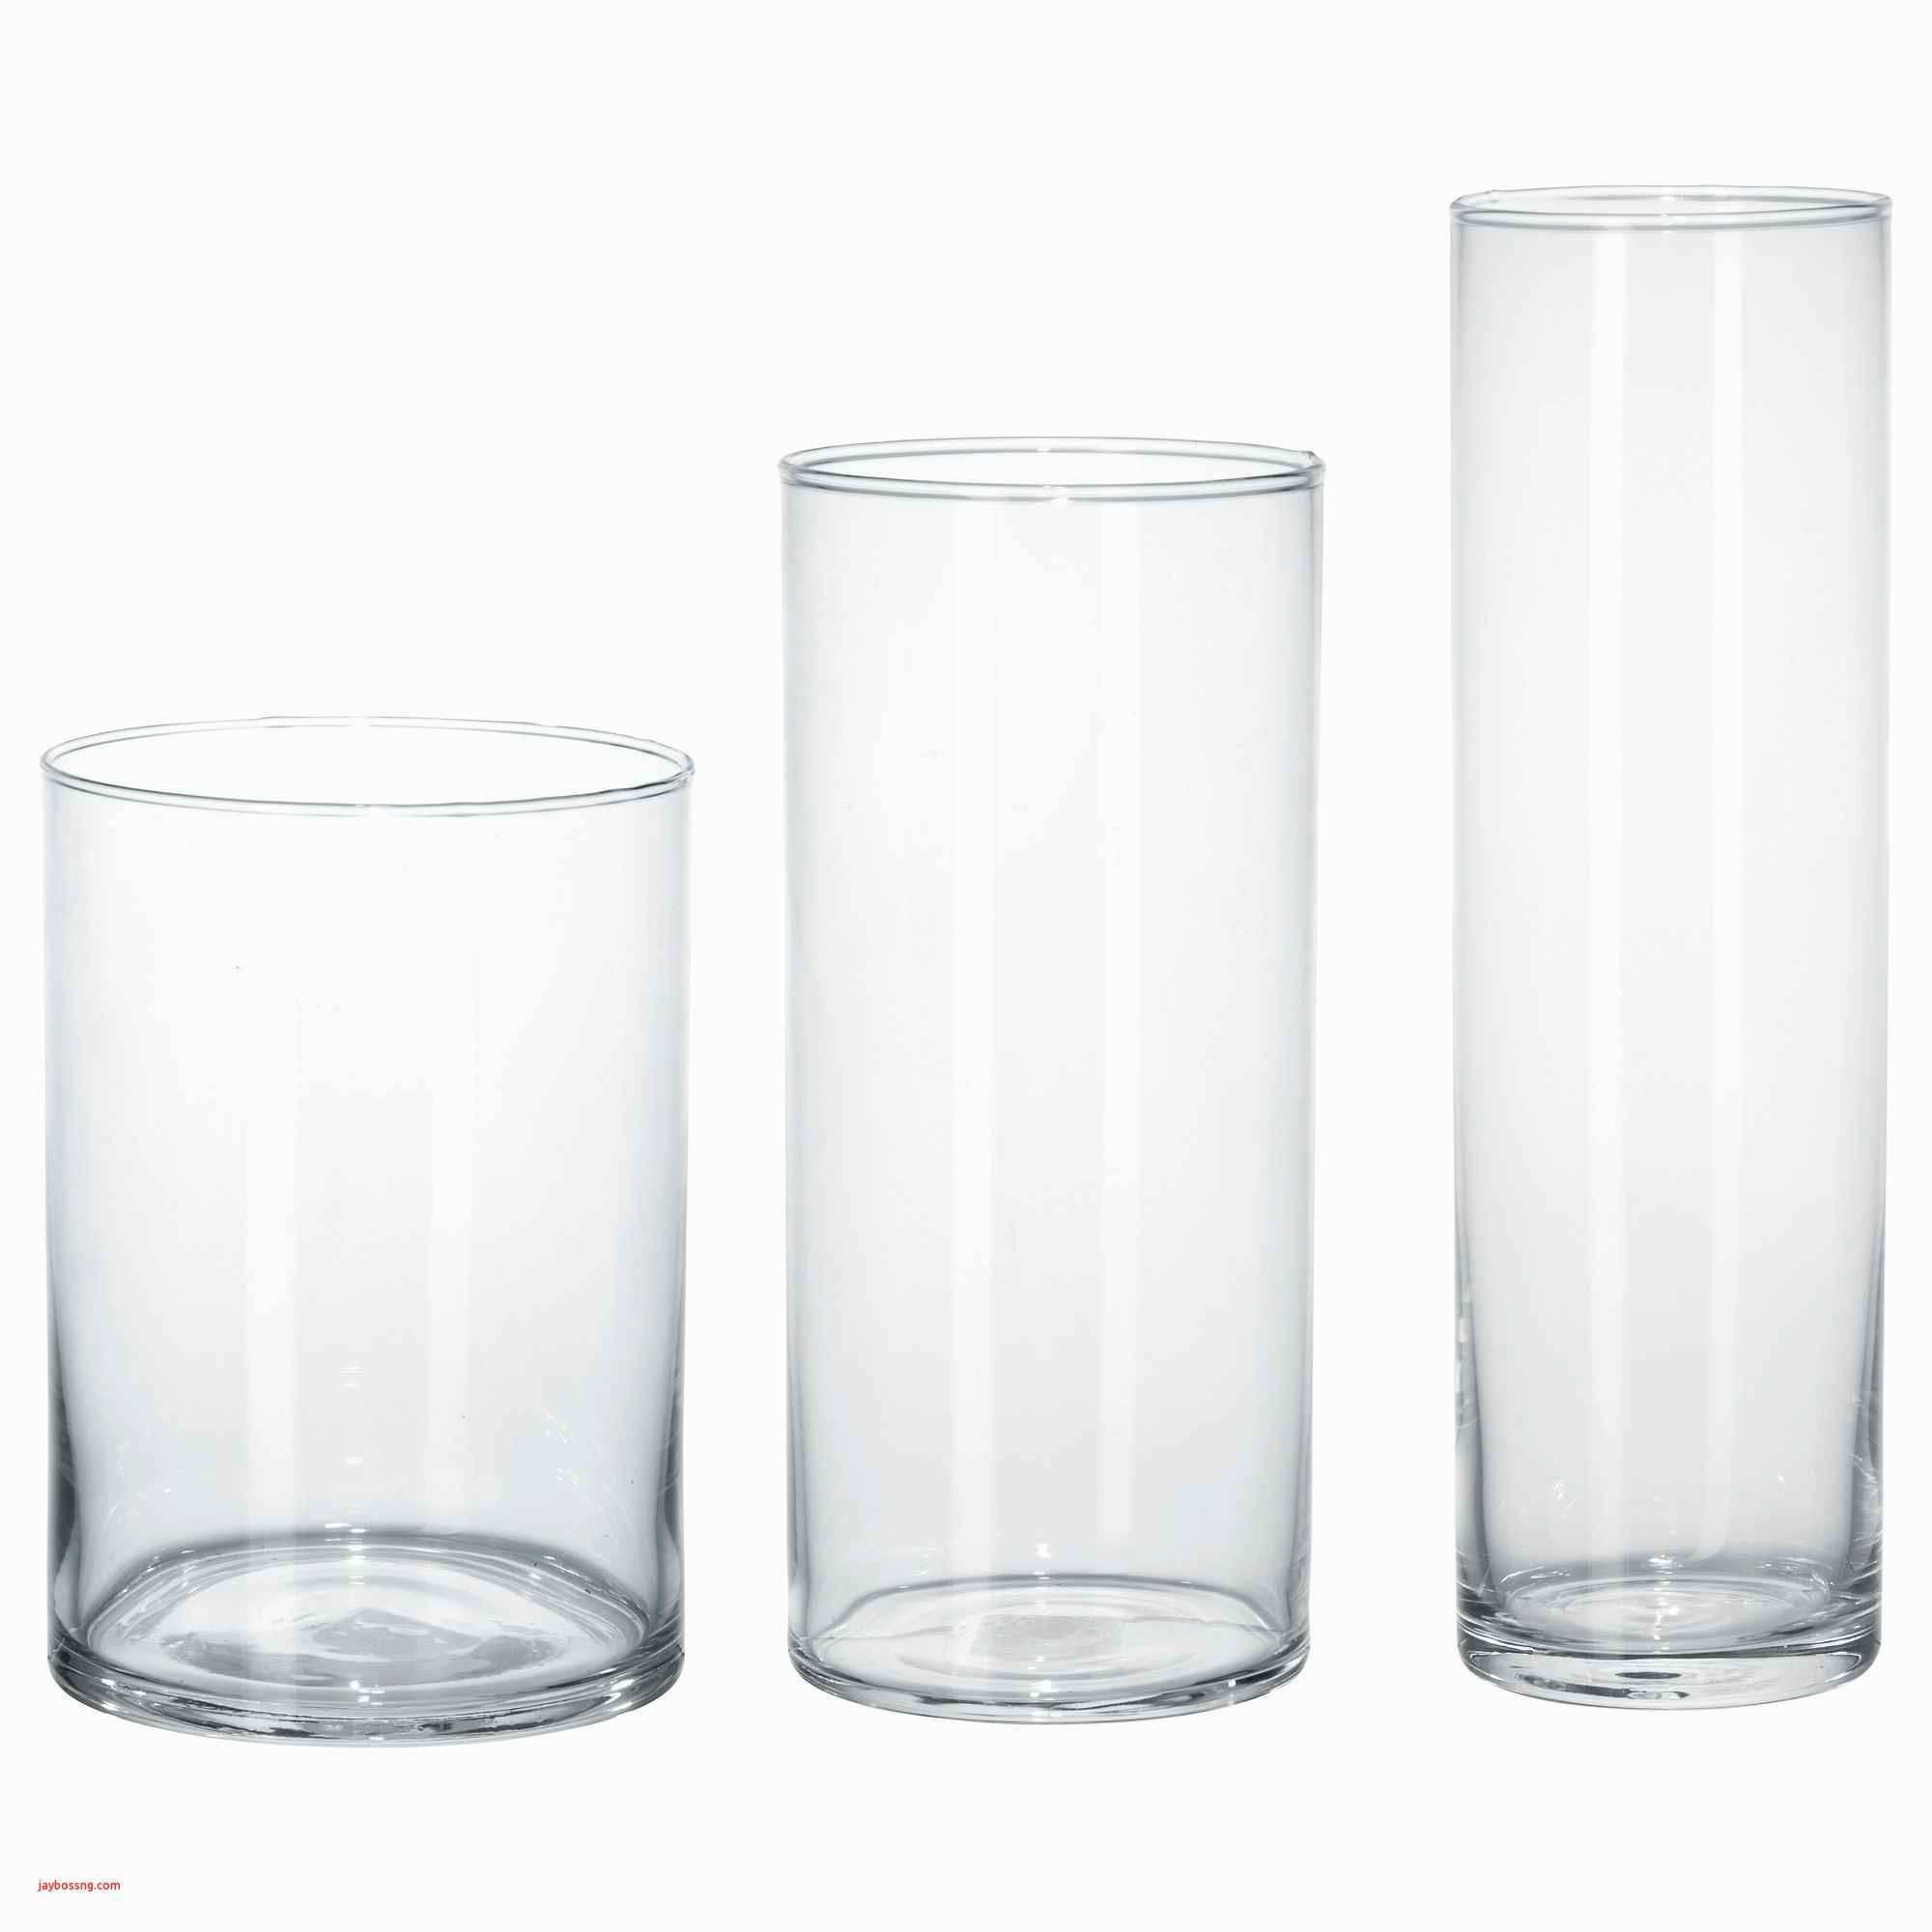 25 Spectacular Plastic Vases wholesale 2022 free download plastic vases wholesale of 24 tall vases for sale the weekly world within 35 magnificent pedestal hurricane candle holders